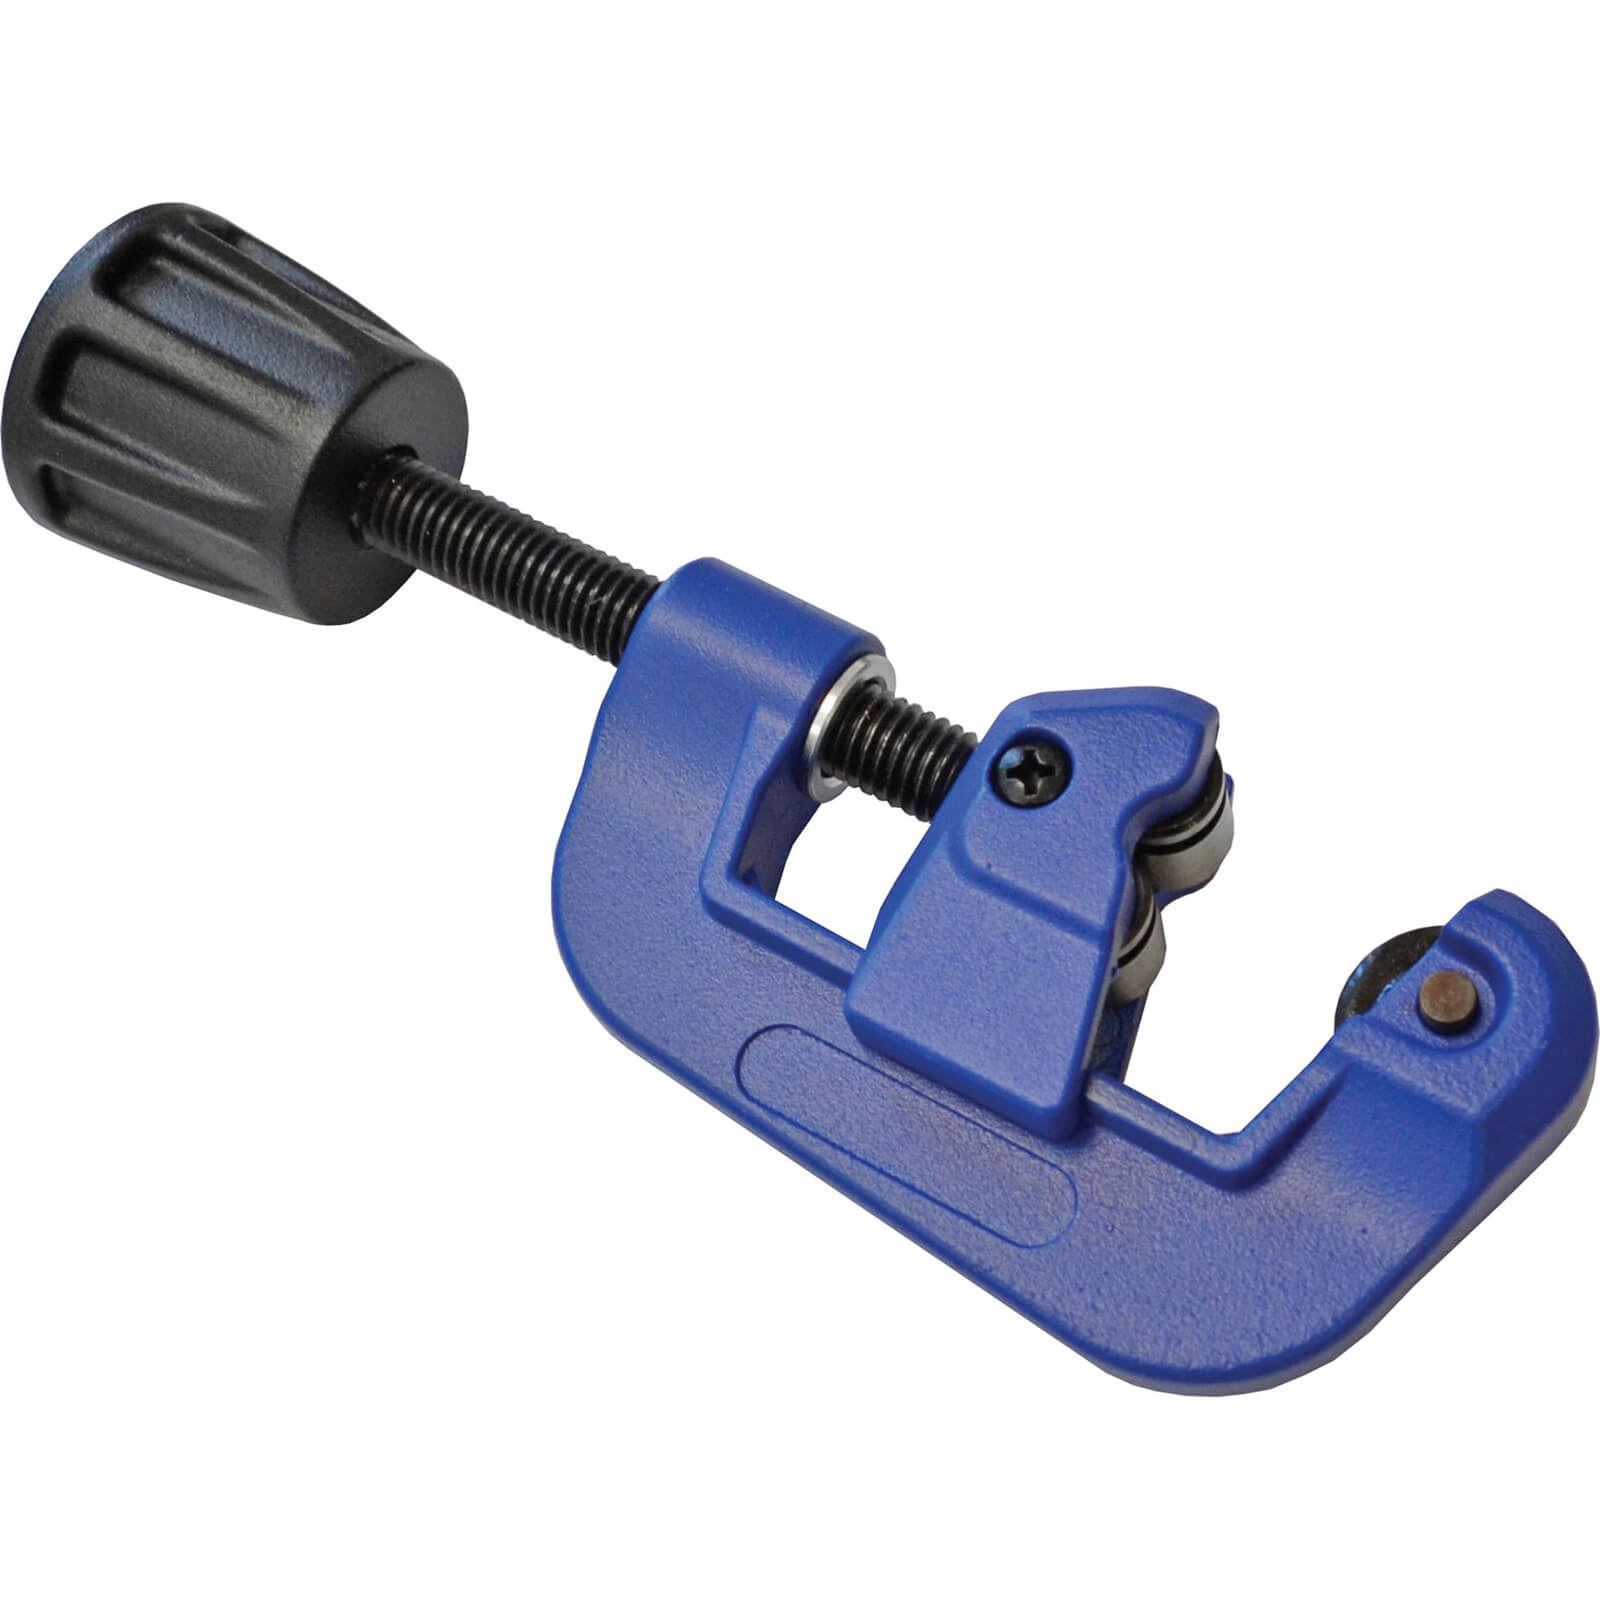 Photo of Faithfull Adjustable Pipe Cutter 3mm - 30mm